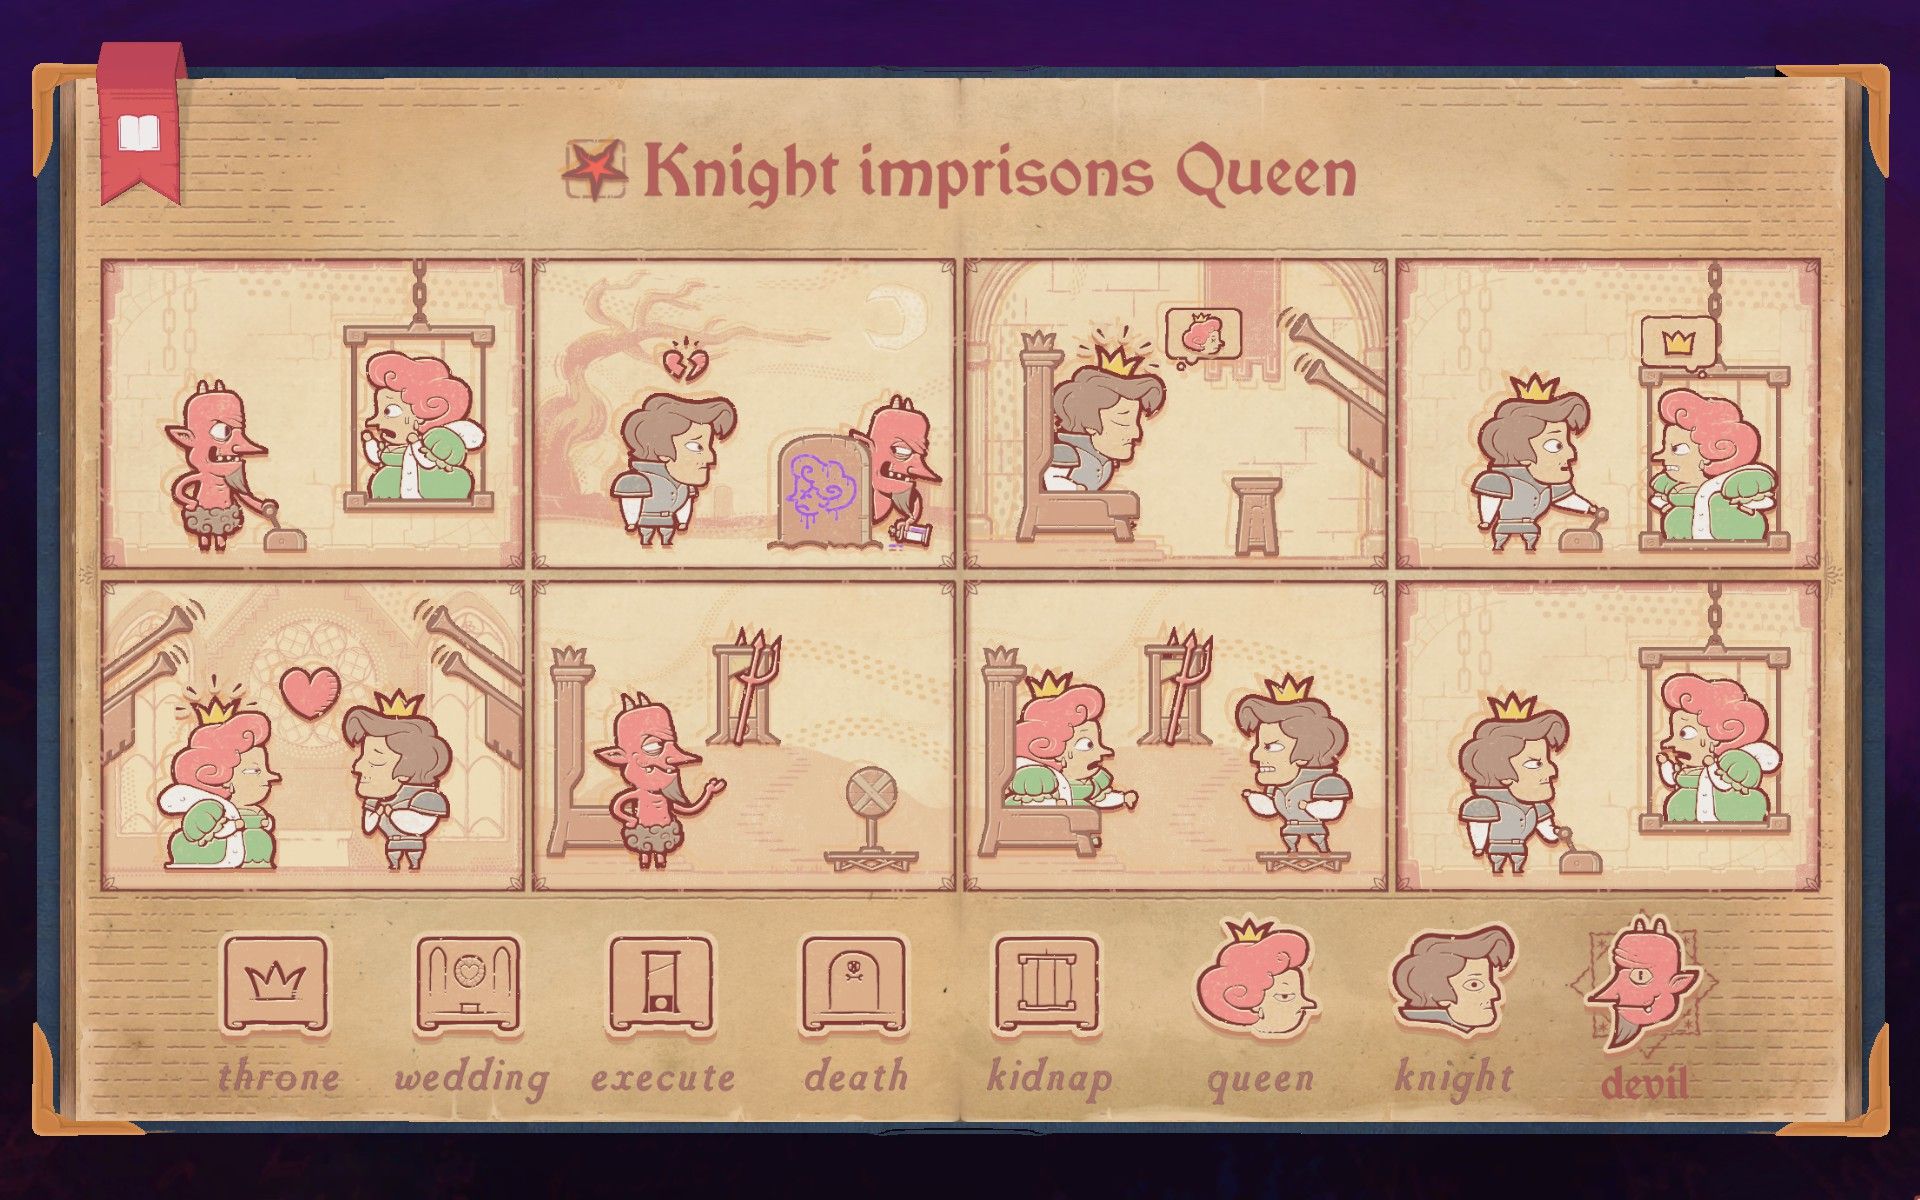 The solution to the devil section of Novels in Storyteller, showing the Knight imprison the Queen.